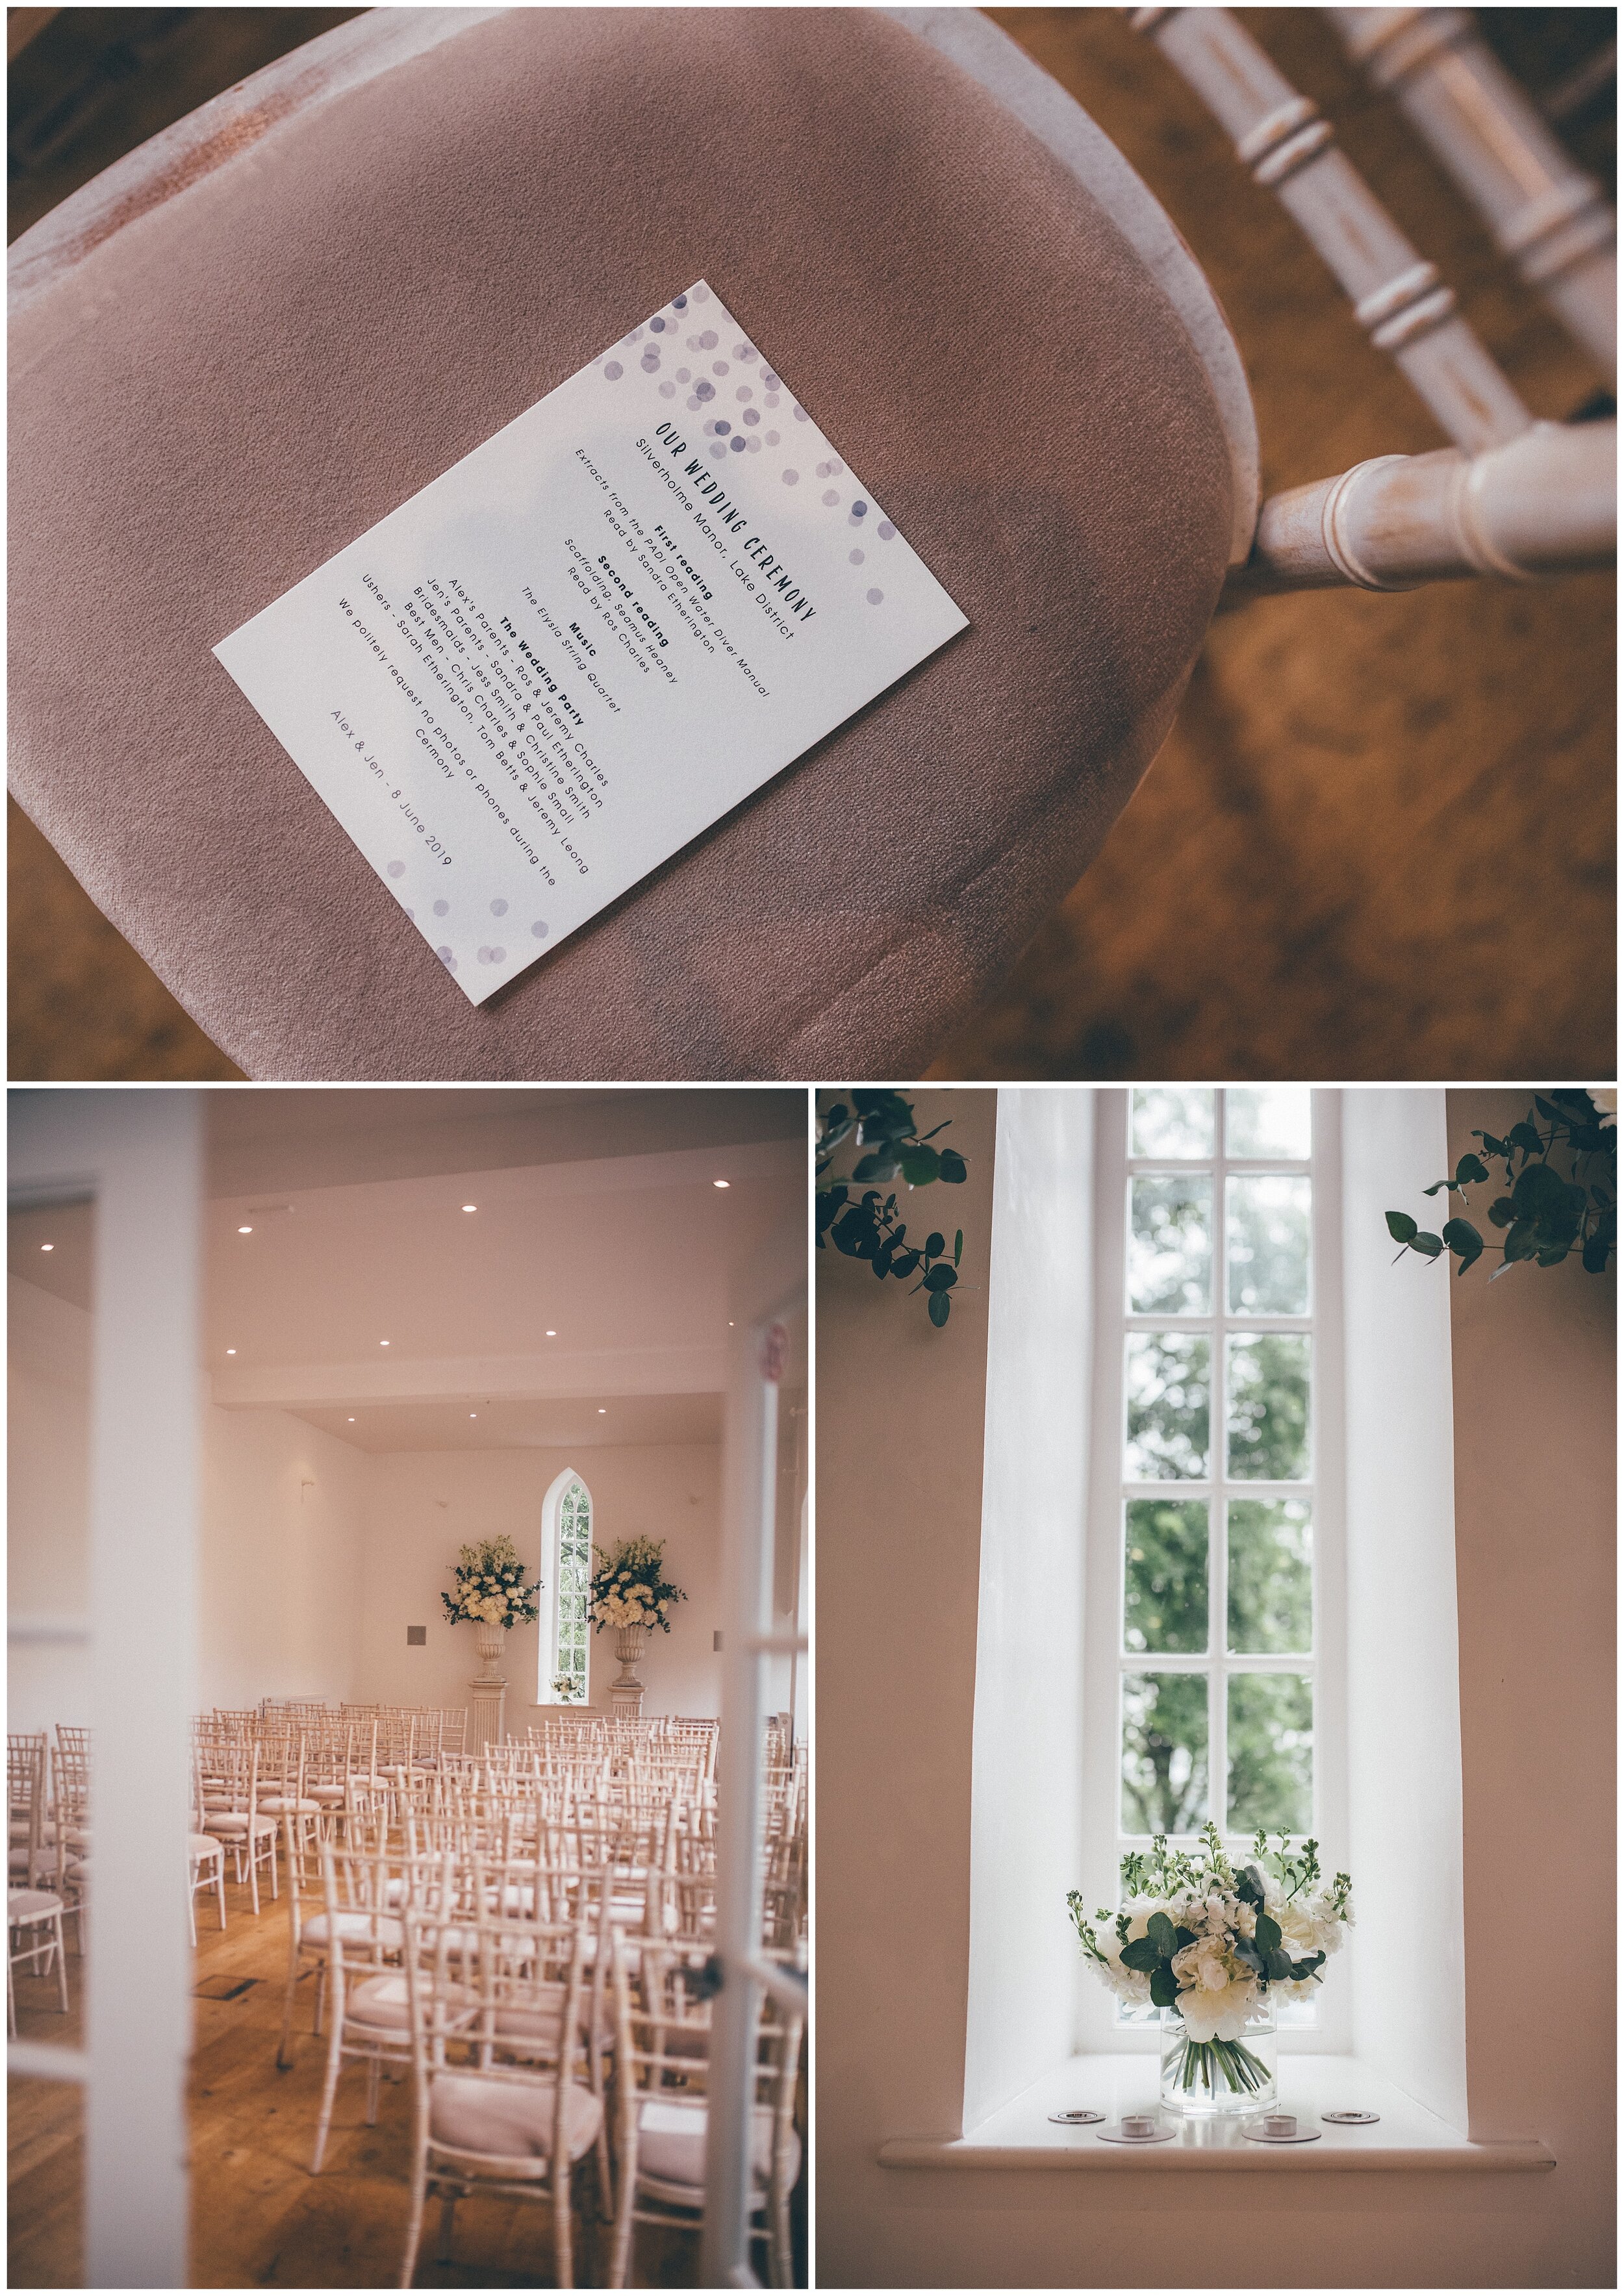 Details of a wedding at Silverholme Estate in the Lake District.